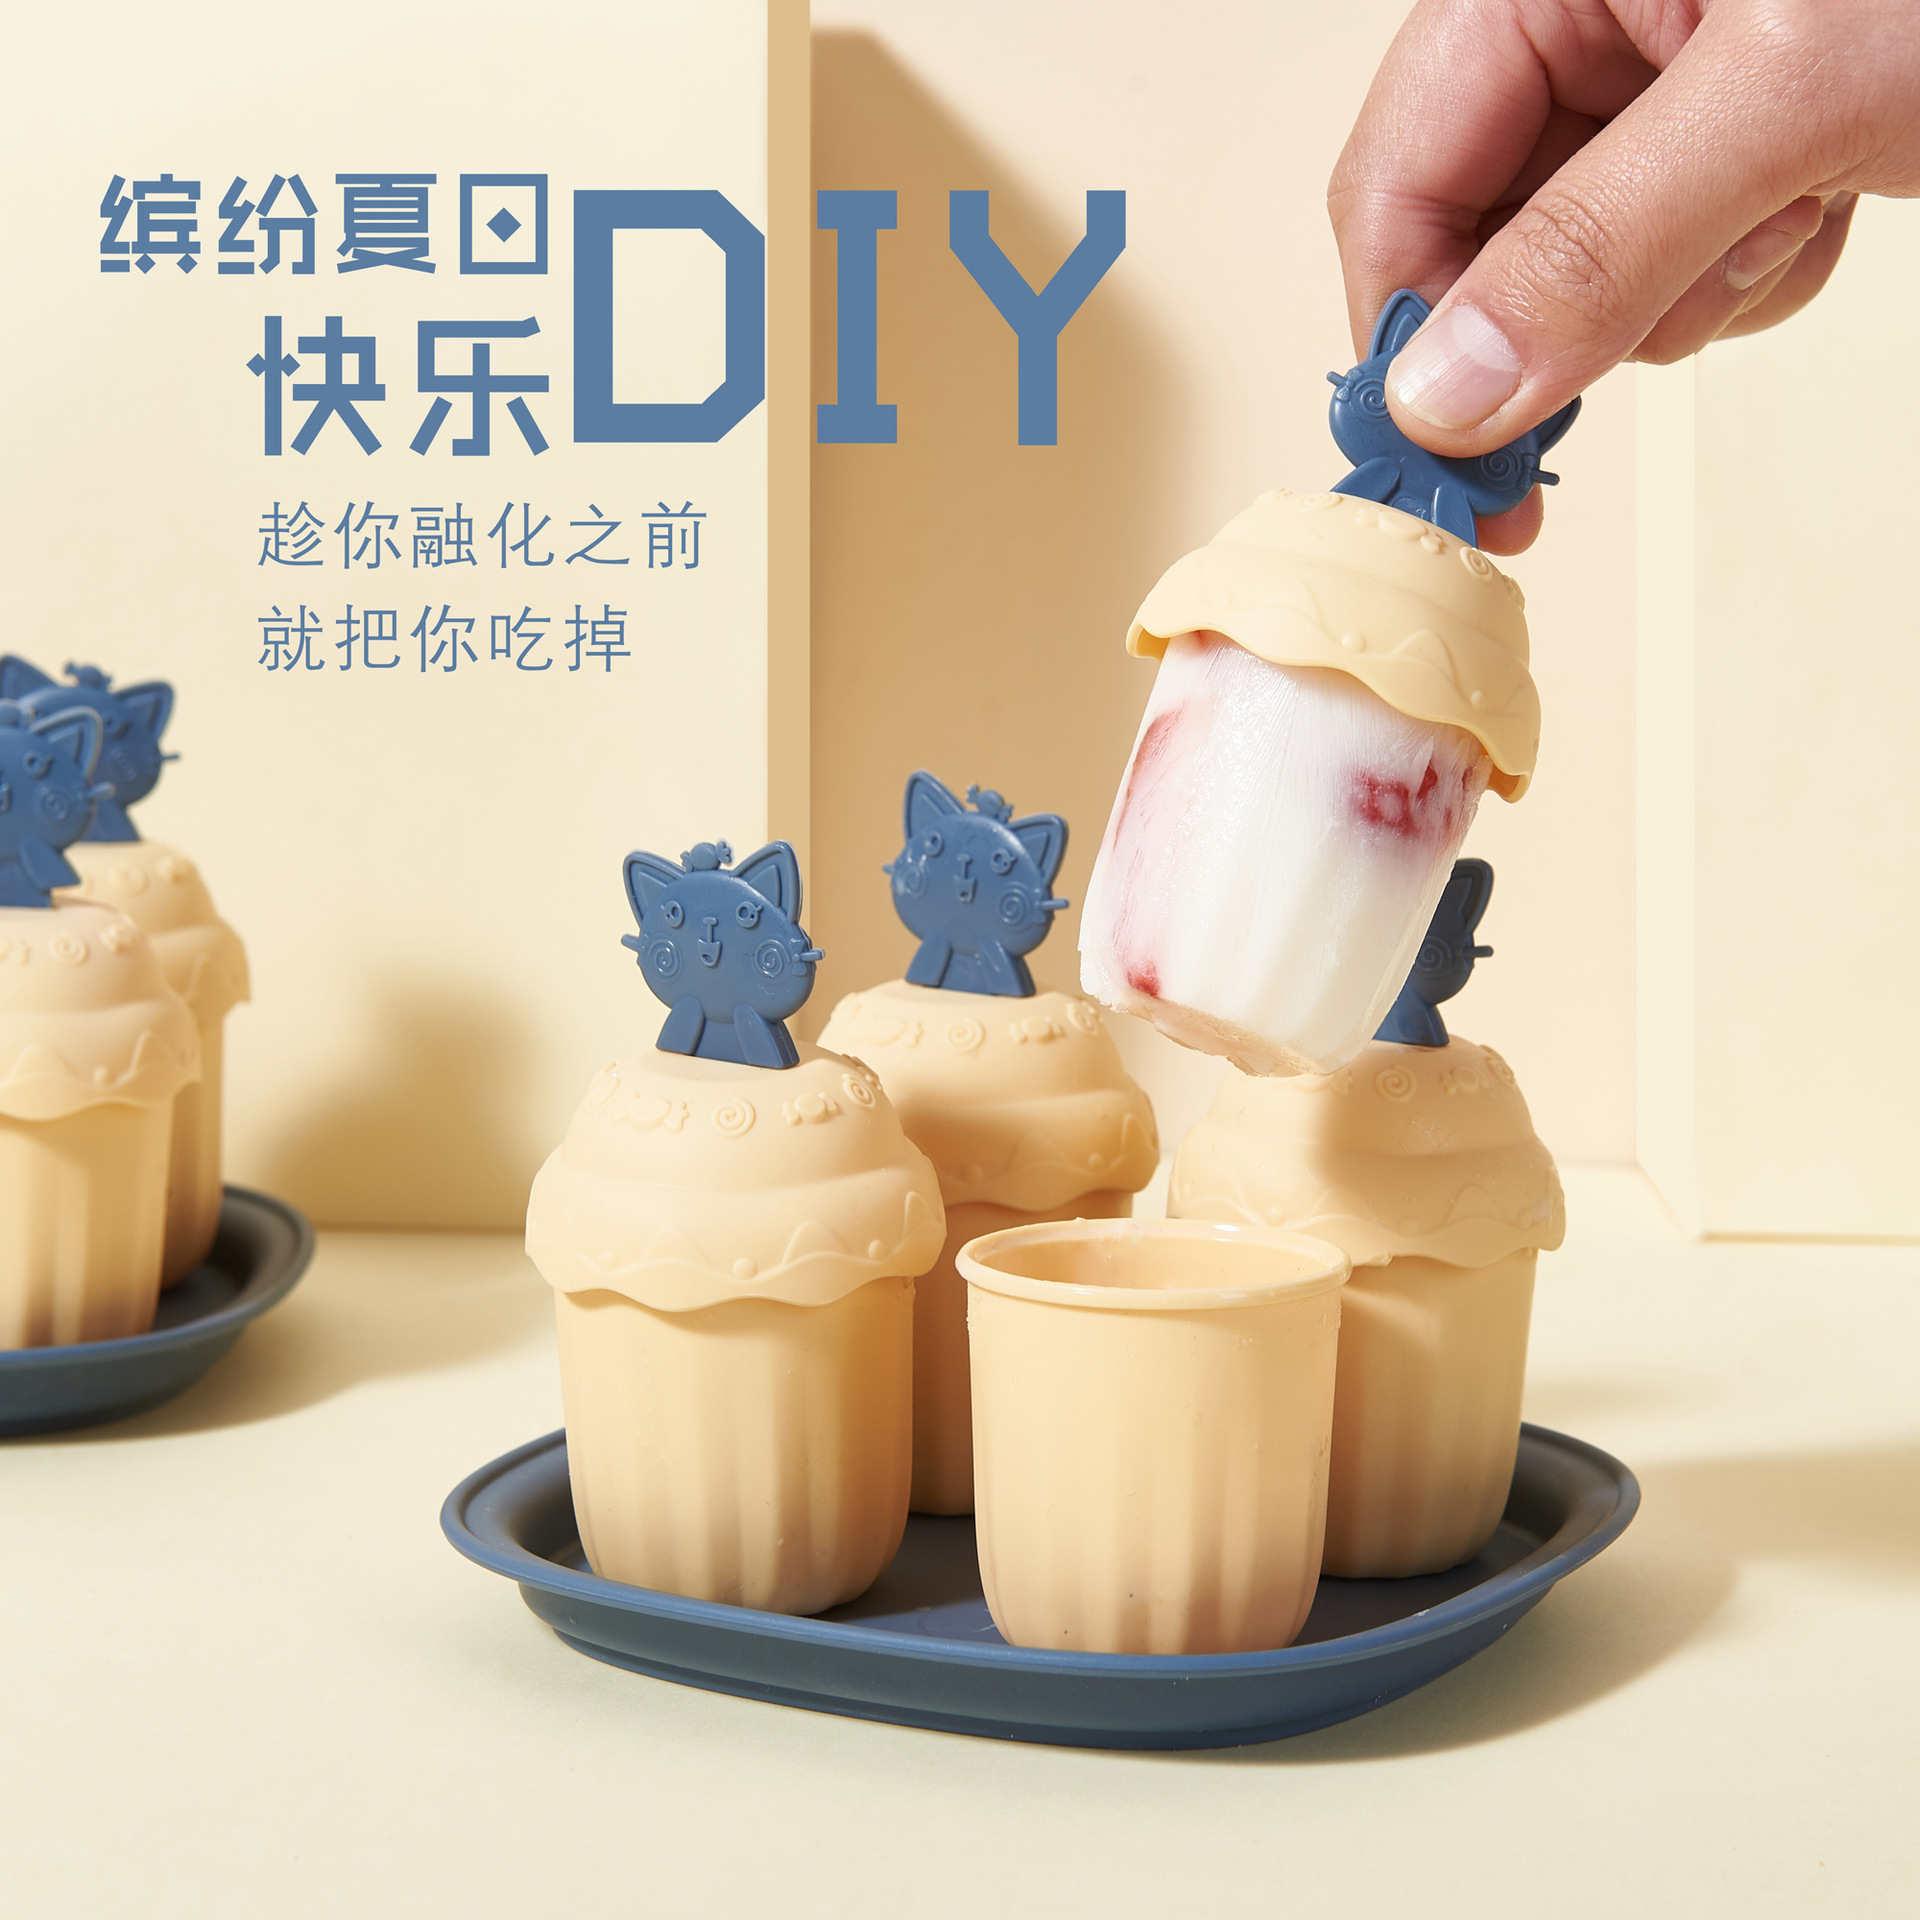 New Ice Tray Baby DIY Creative Ice Candy Ice Cream Ice Tray 6 Groups with Lid Summer Children Ice-Cream Mould